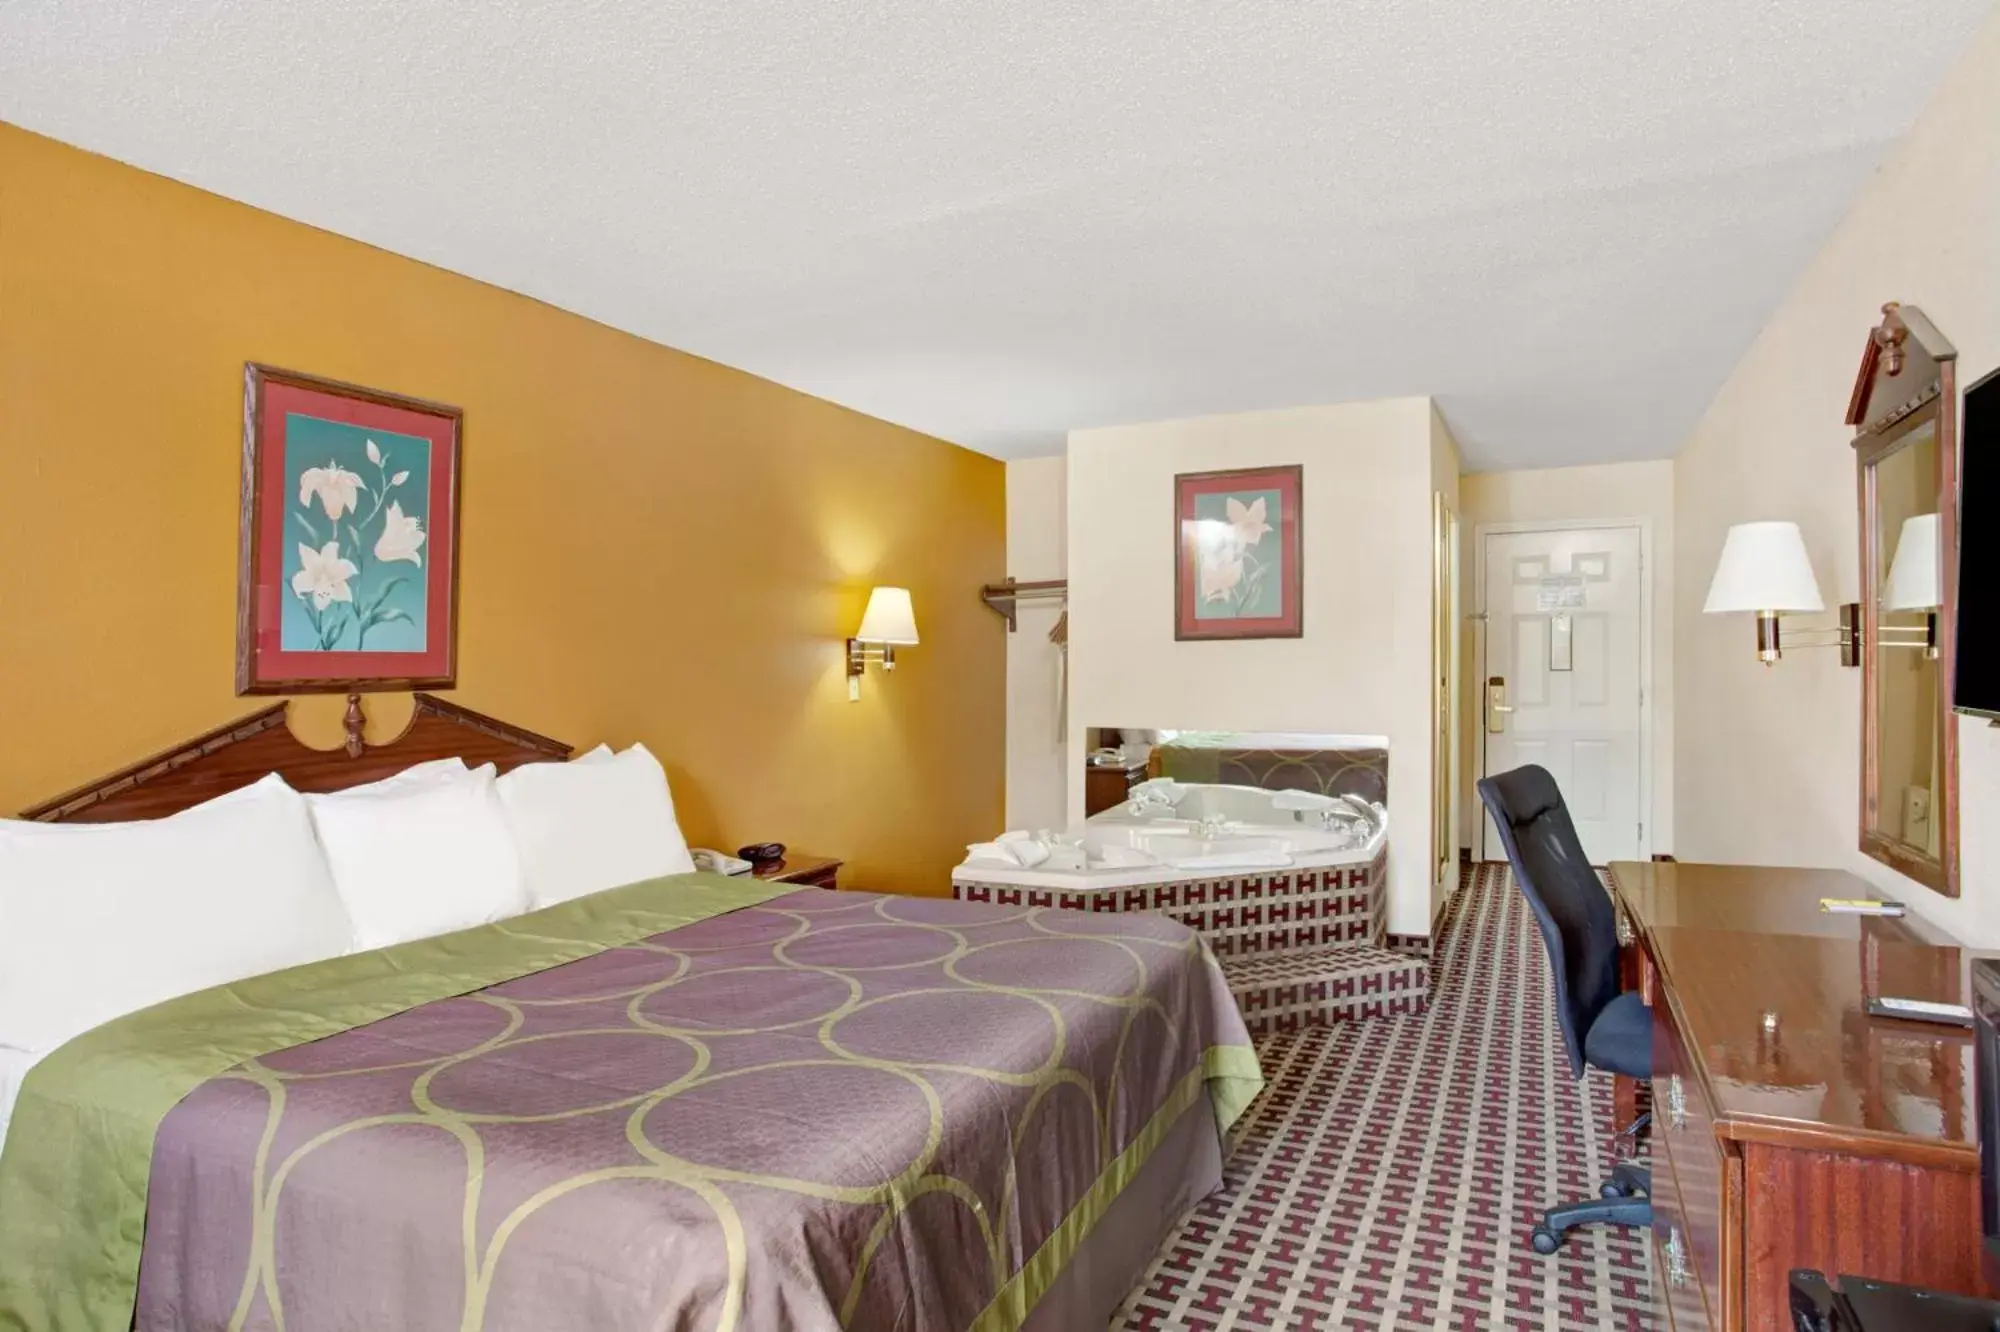 Bed in Super 8 by Wyndham Forrest City AR